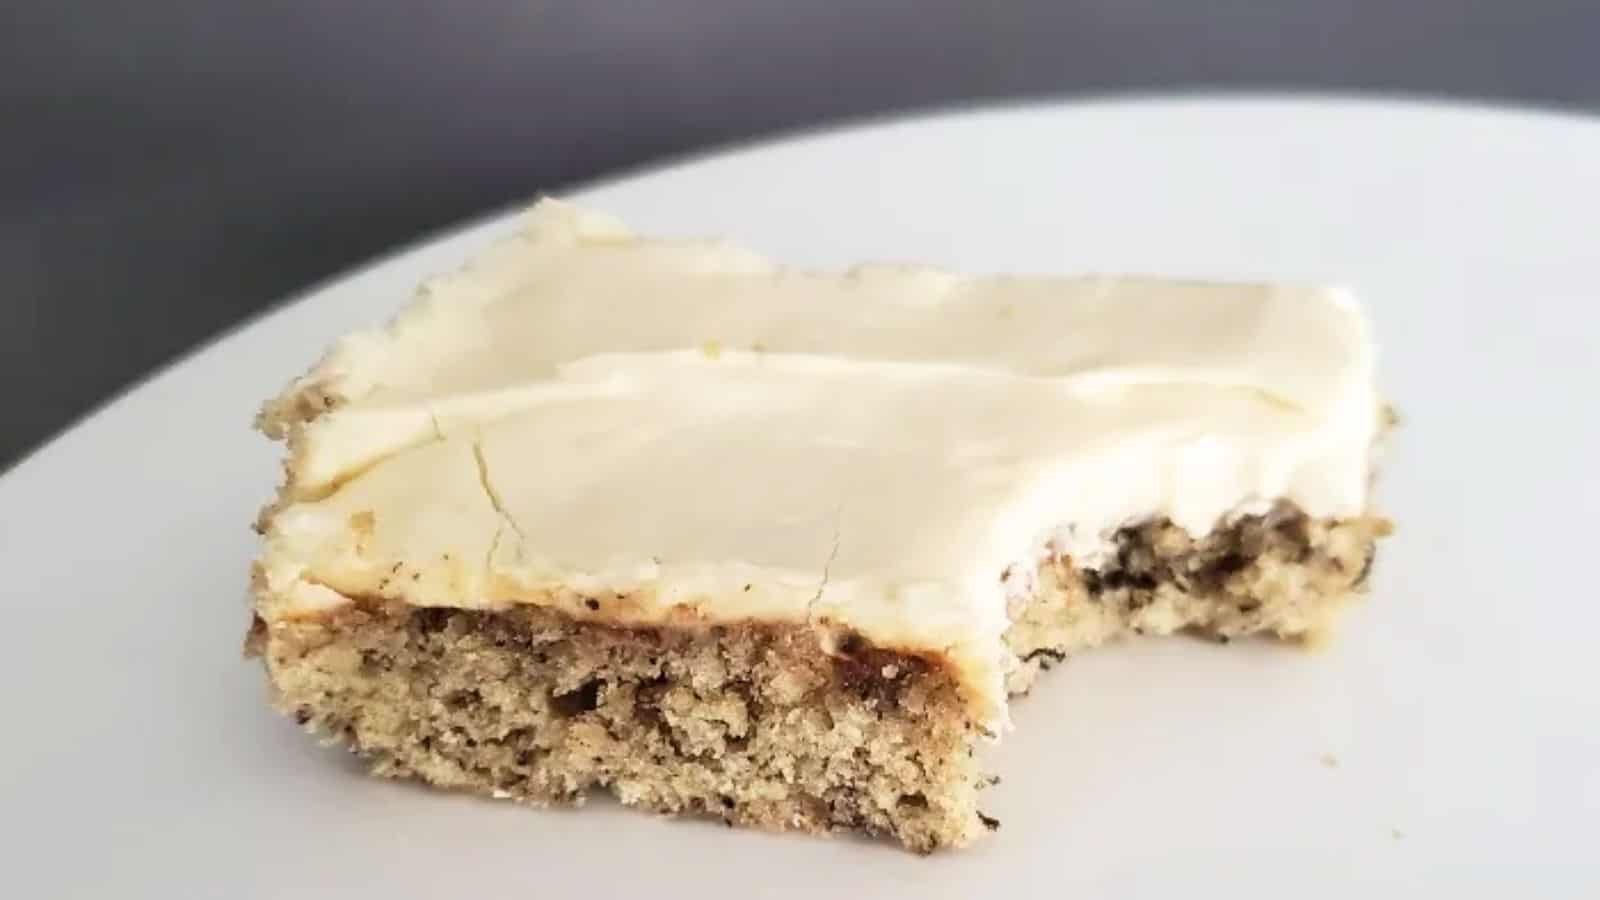 Image shows a Frosted Banana Bar with a bite taken from it on a white plate.